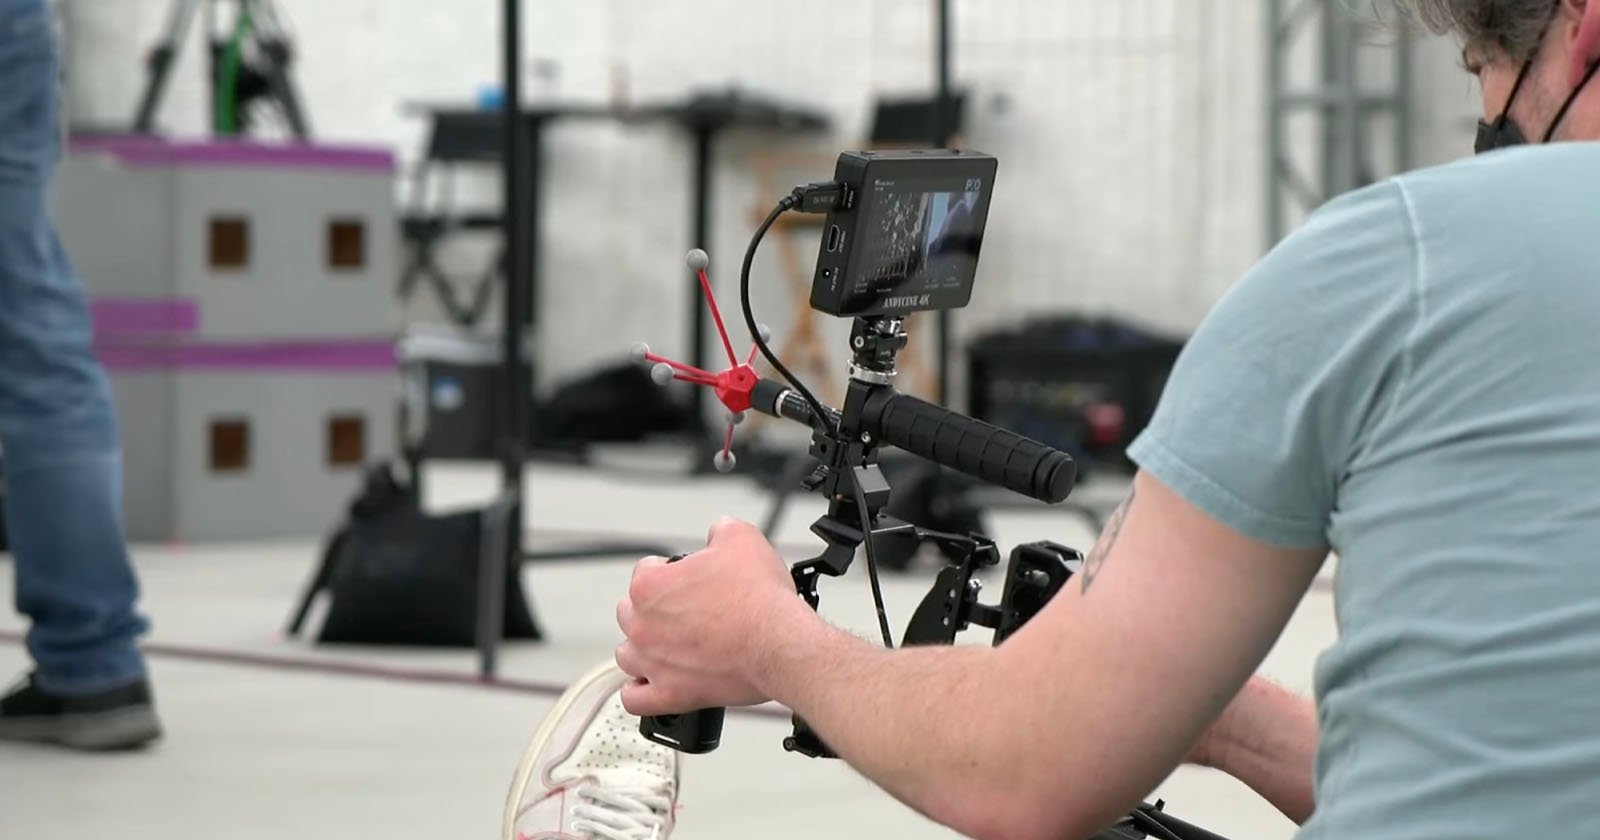 Sony Prototypes a Motion Capture Rig That Controls a 3D Virtual Camera